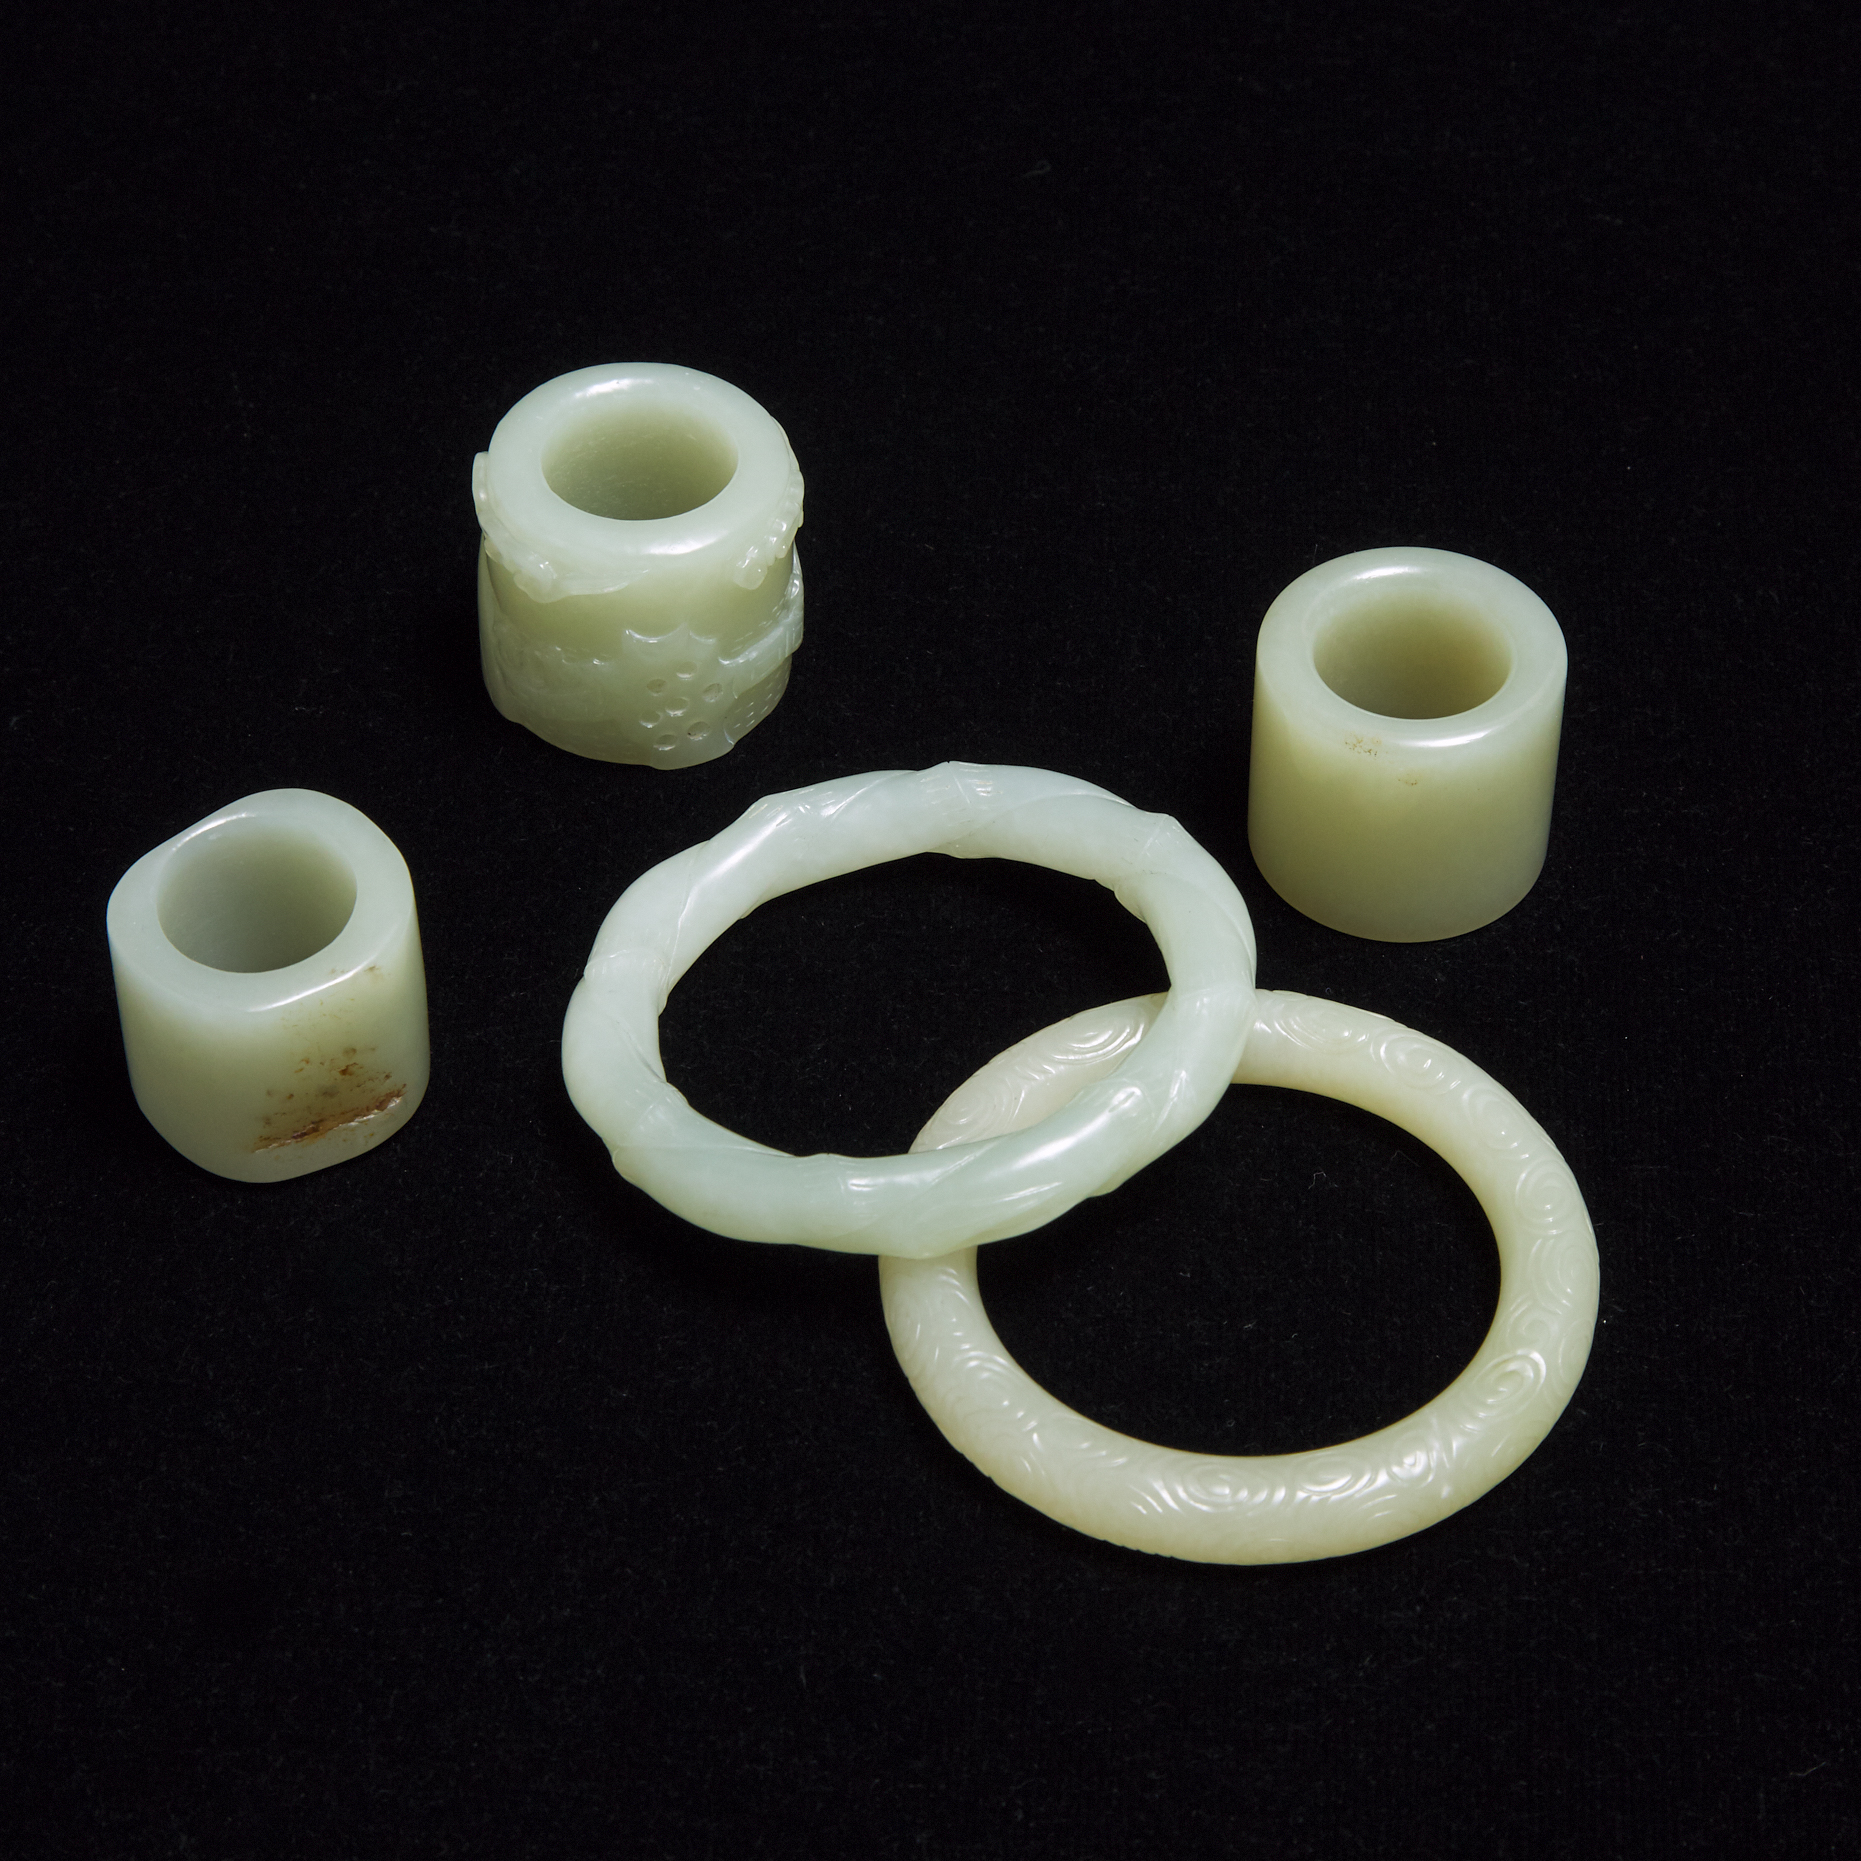 A Group of Three Pale Celadon Jade Archer Rings, together with Two Pale Celadon Jade Bangles